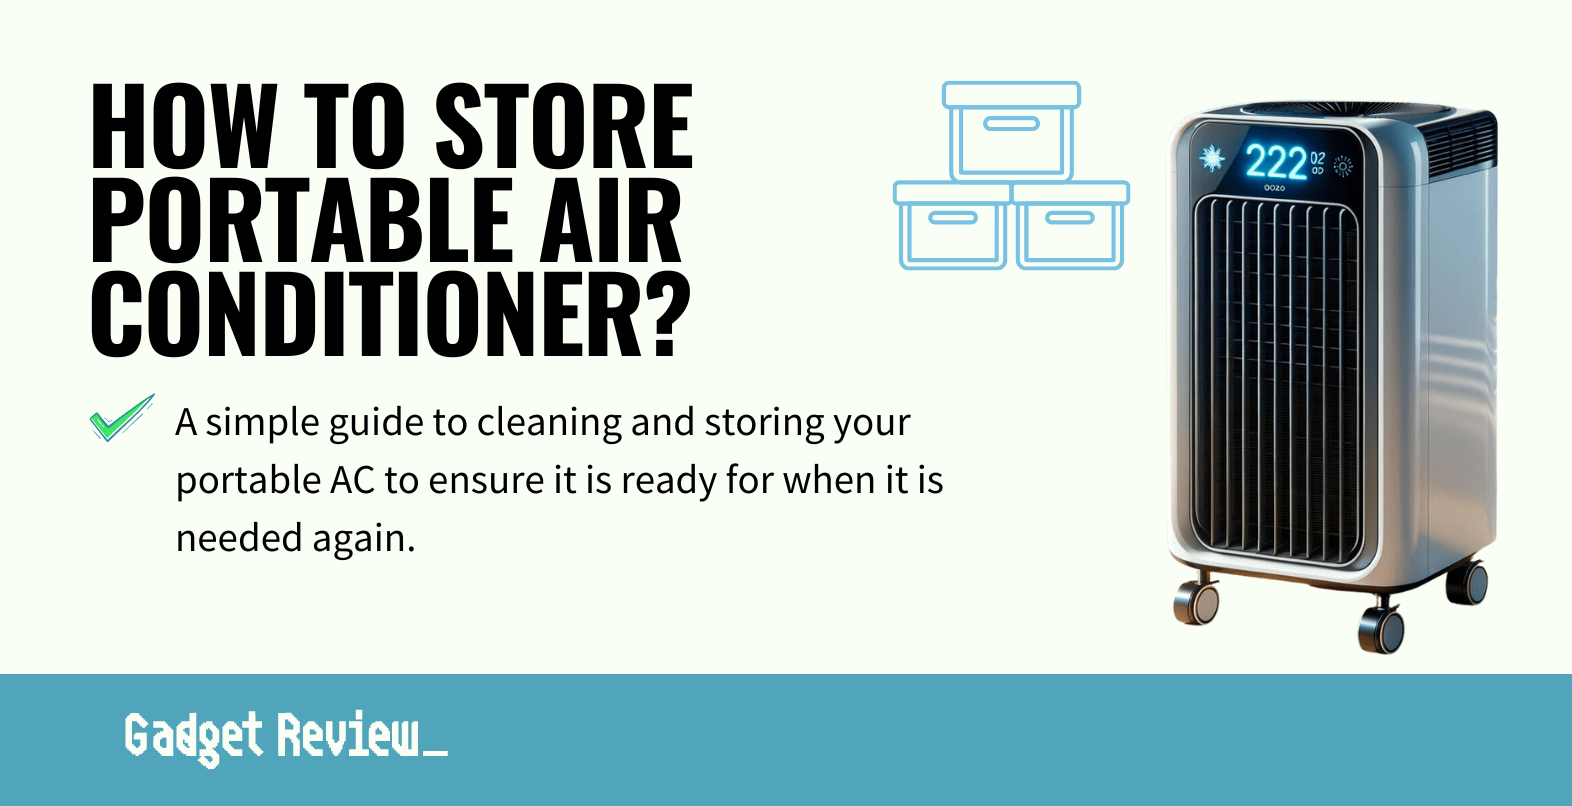 how to store portable air conditioner guide